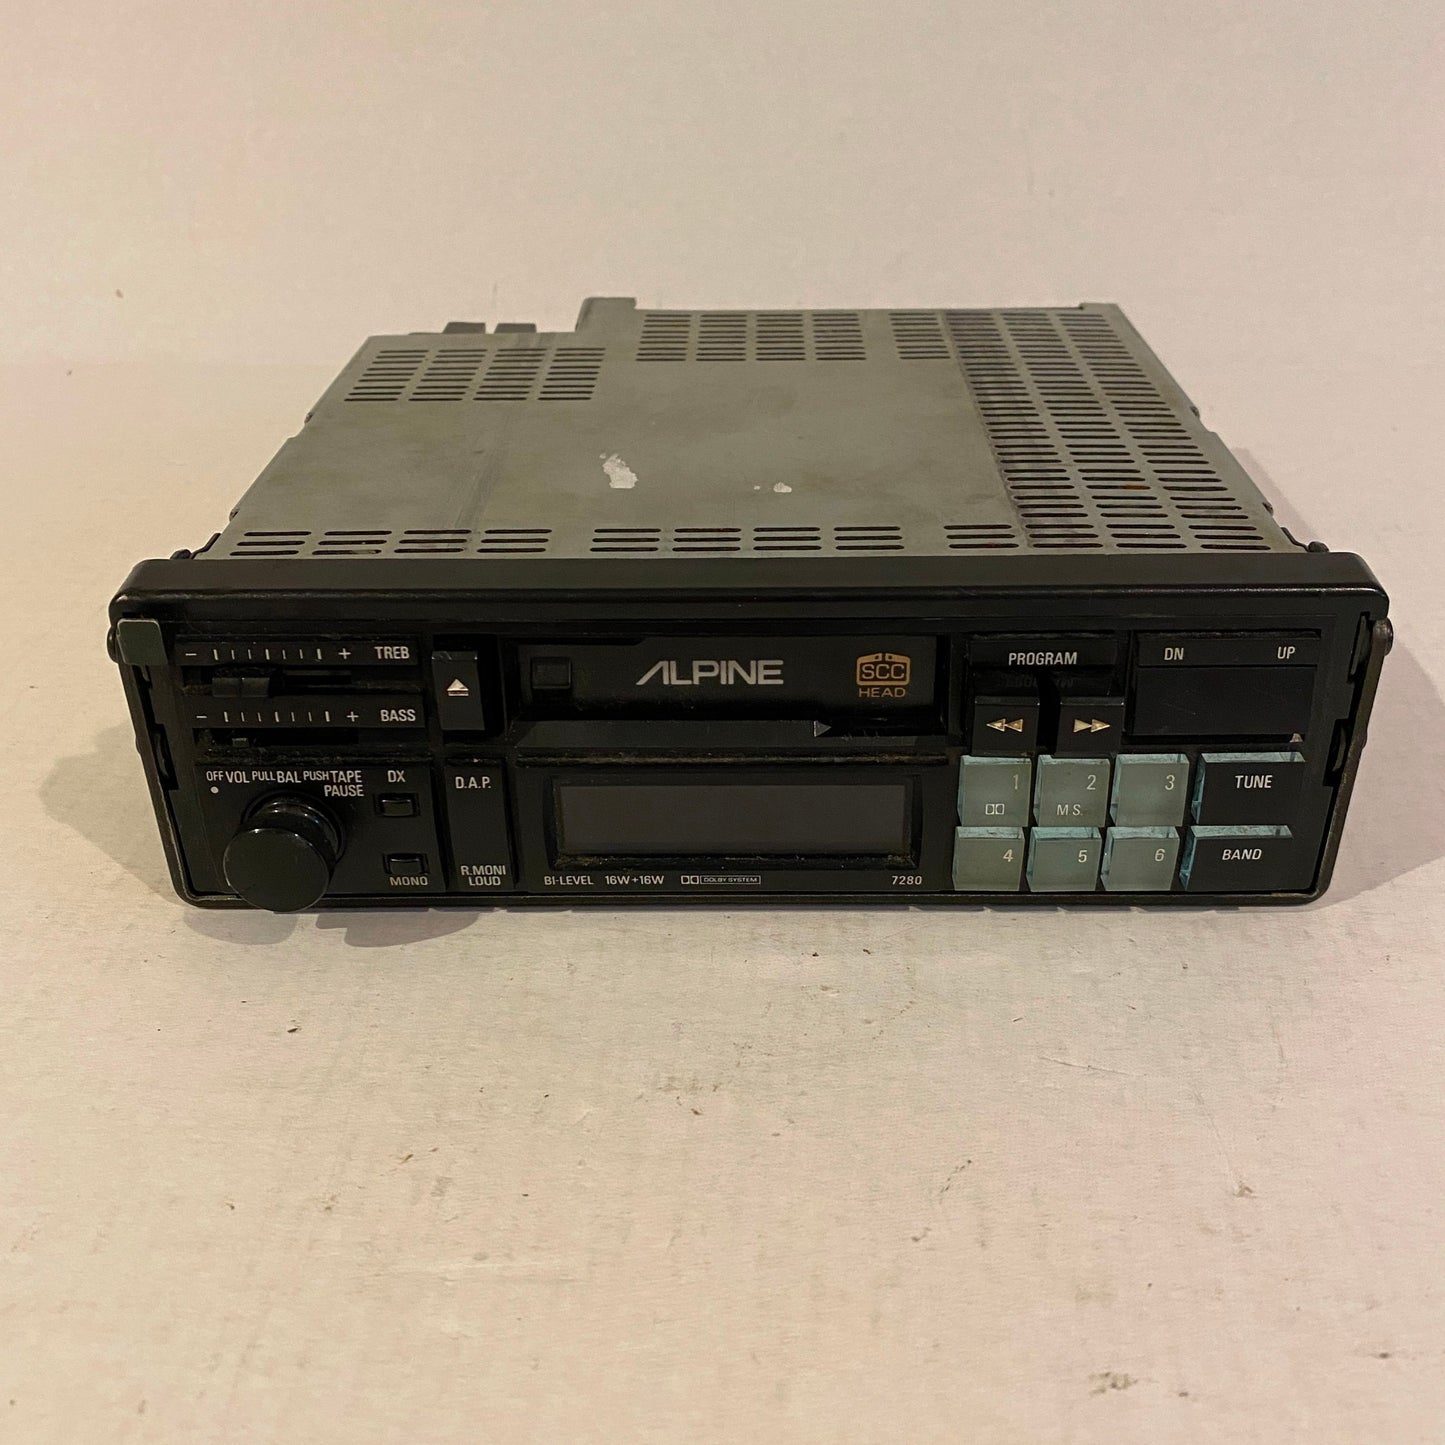 For parts or repair - Vintage Alpine Car Stereo Cassette Player - 7280S